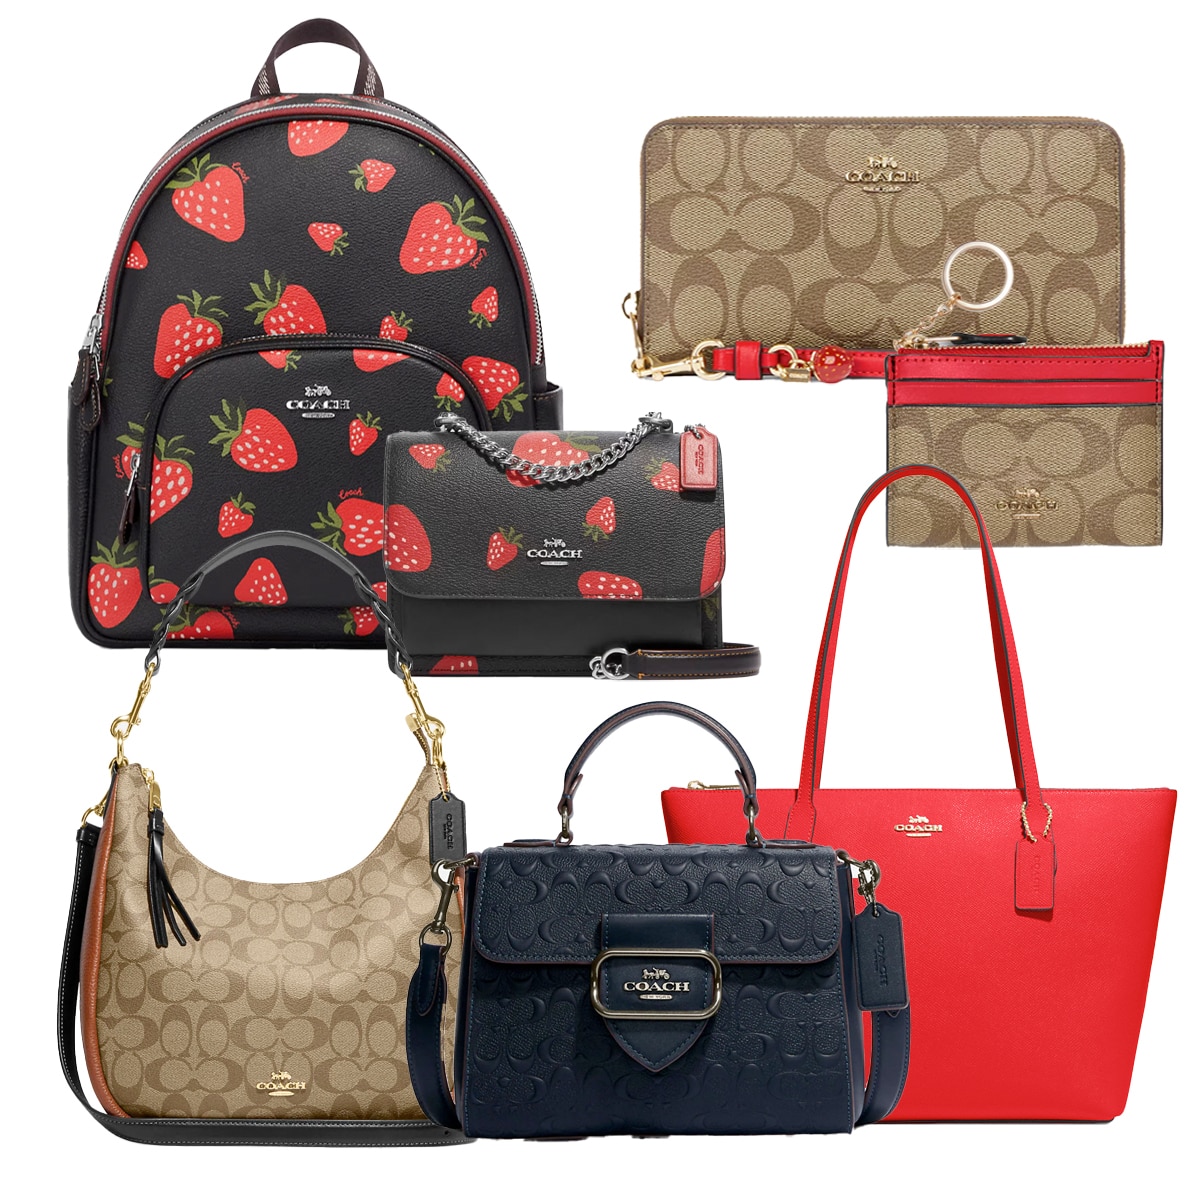 Hurry to Coach Outlet's Limited&Time Sale for the Best 70% Off Deals